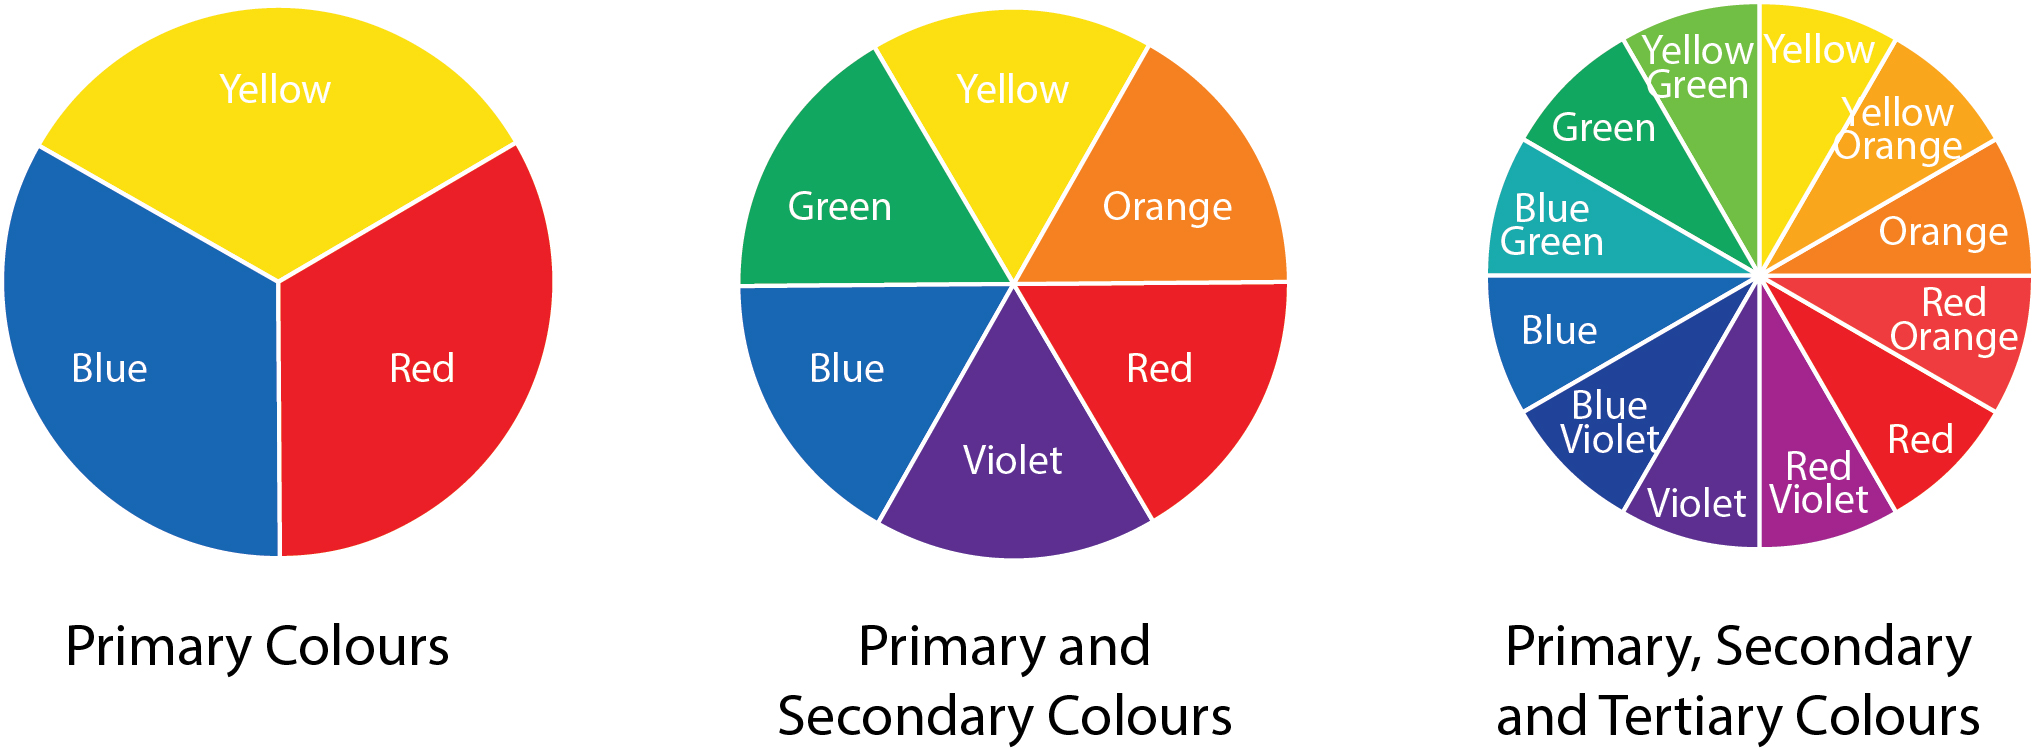 primary colors secondary color wheel